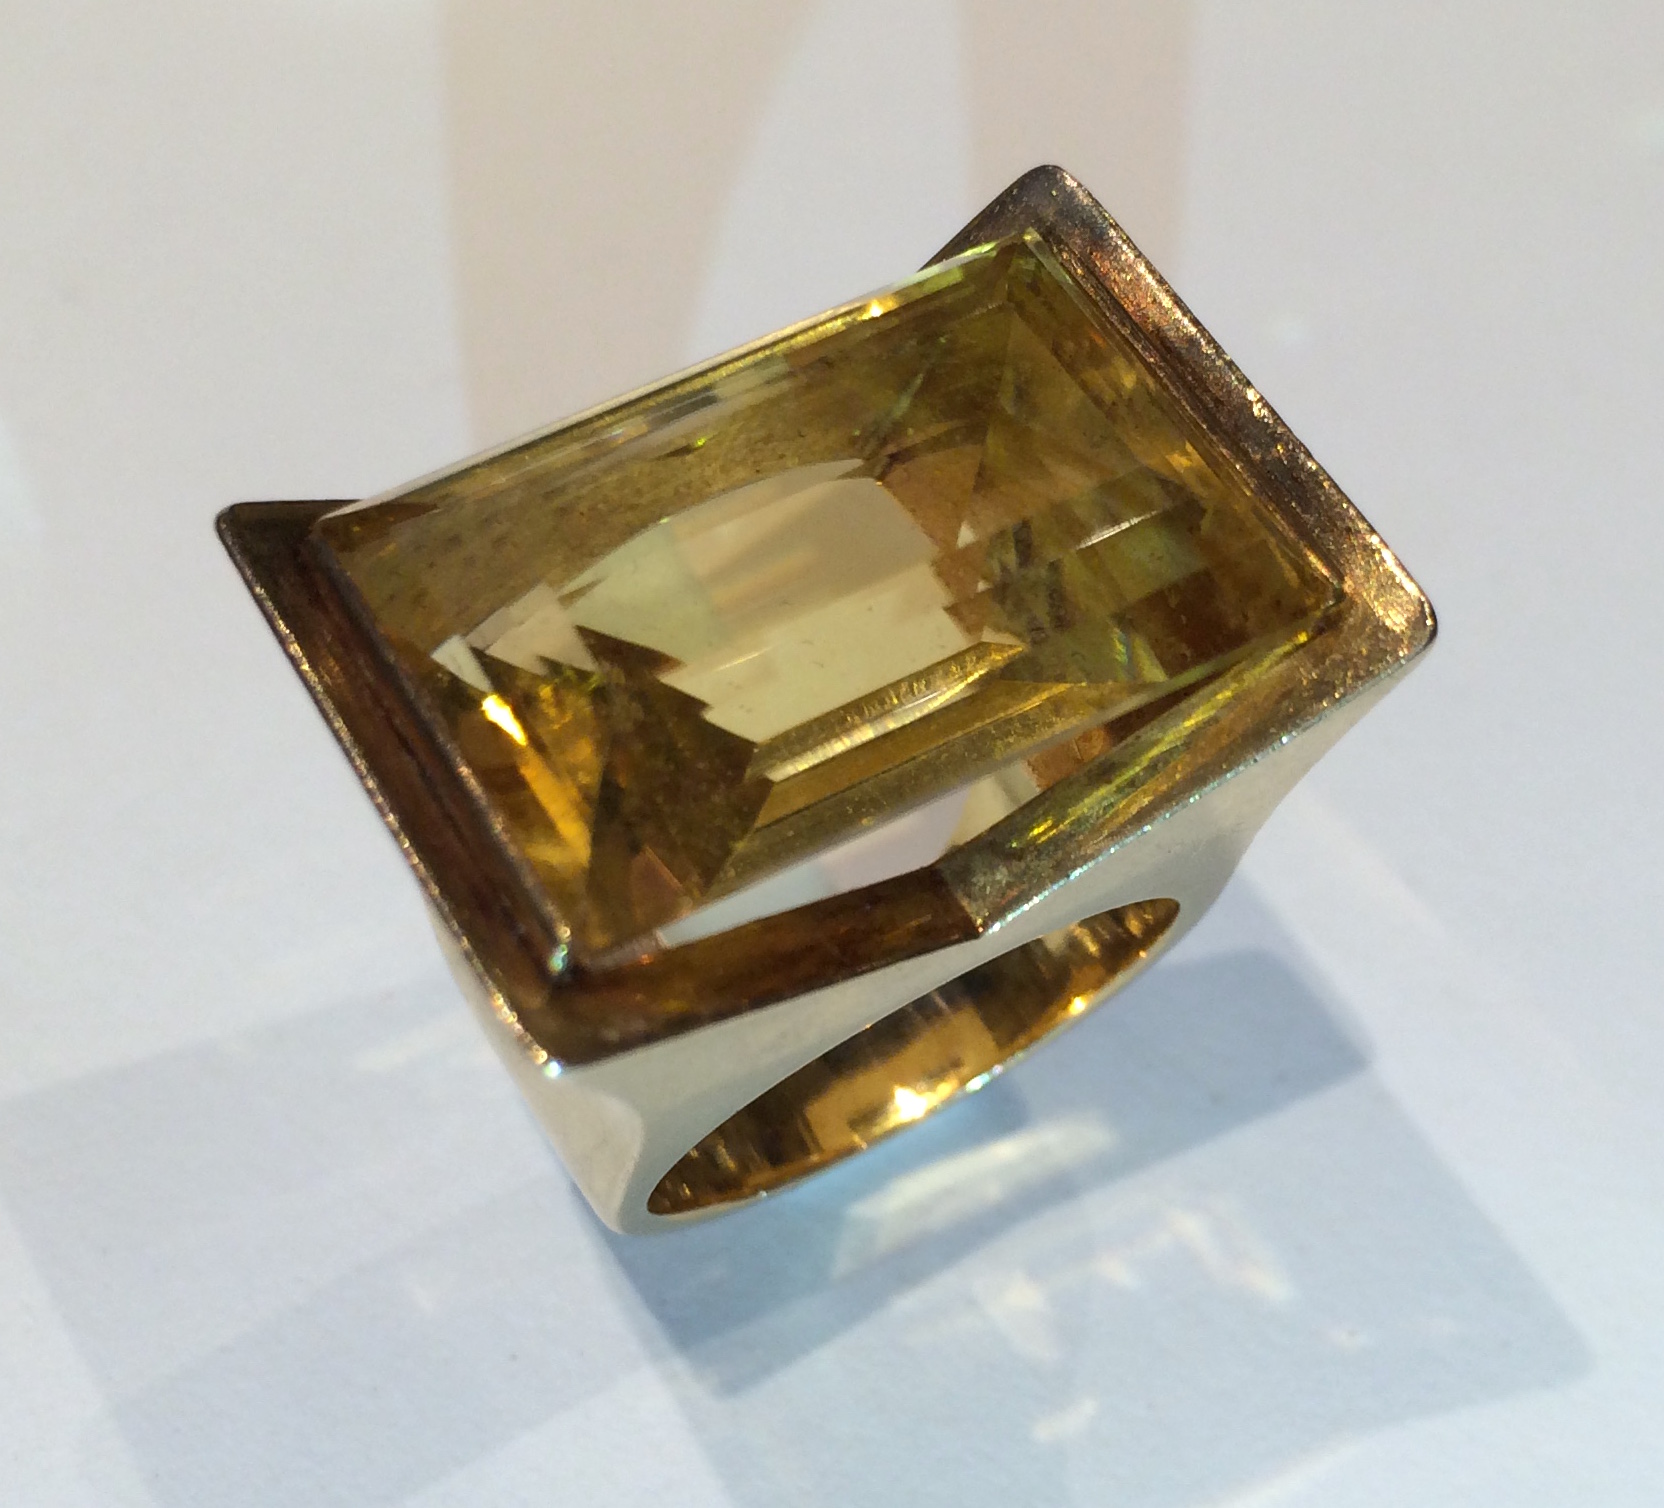 French “Retro” ring, a large emerald cut citrine (approx. 20 carats TW) set in a geometric 18K gold mounting, signed, c. 1940